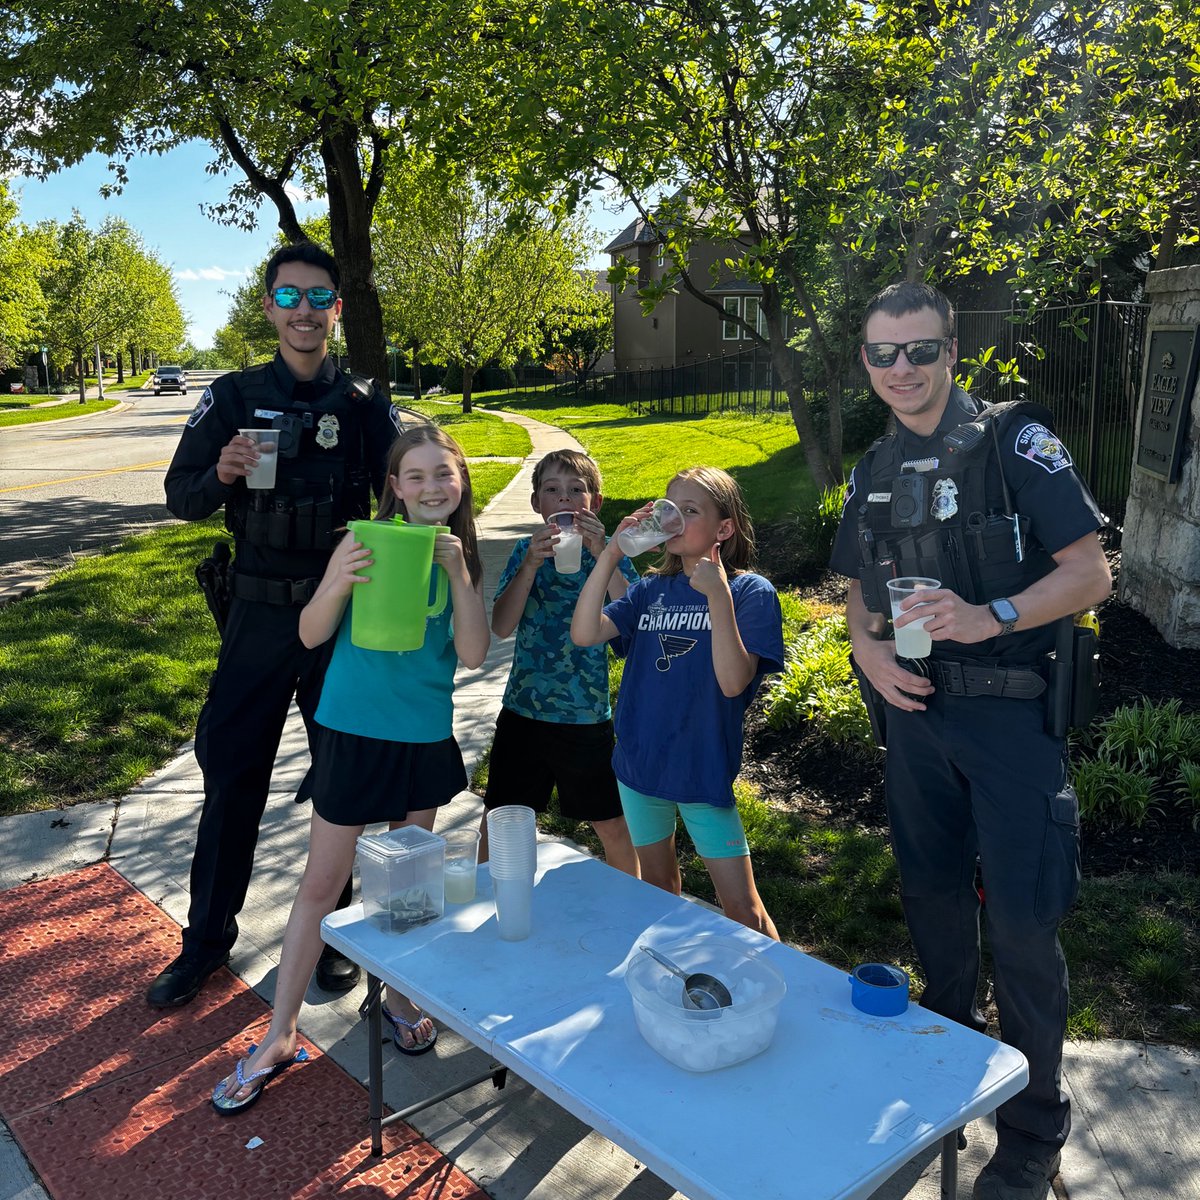 When our officers can, they enjoy a quick visit to local kids' lemonade stands to show support for our young neighbors. Officers De Leon and Thomas say their cups of lemonade from this stand near 57th and Clear Creek Parkway were 10/10!